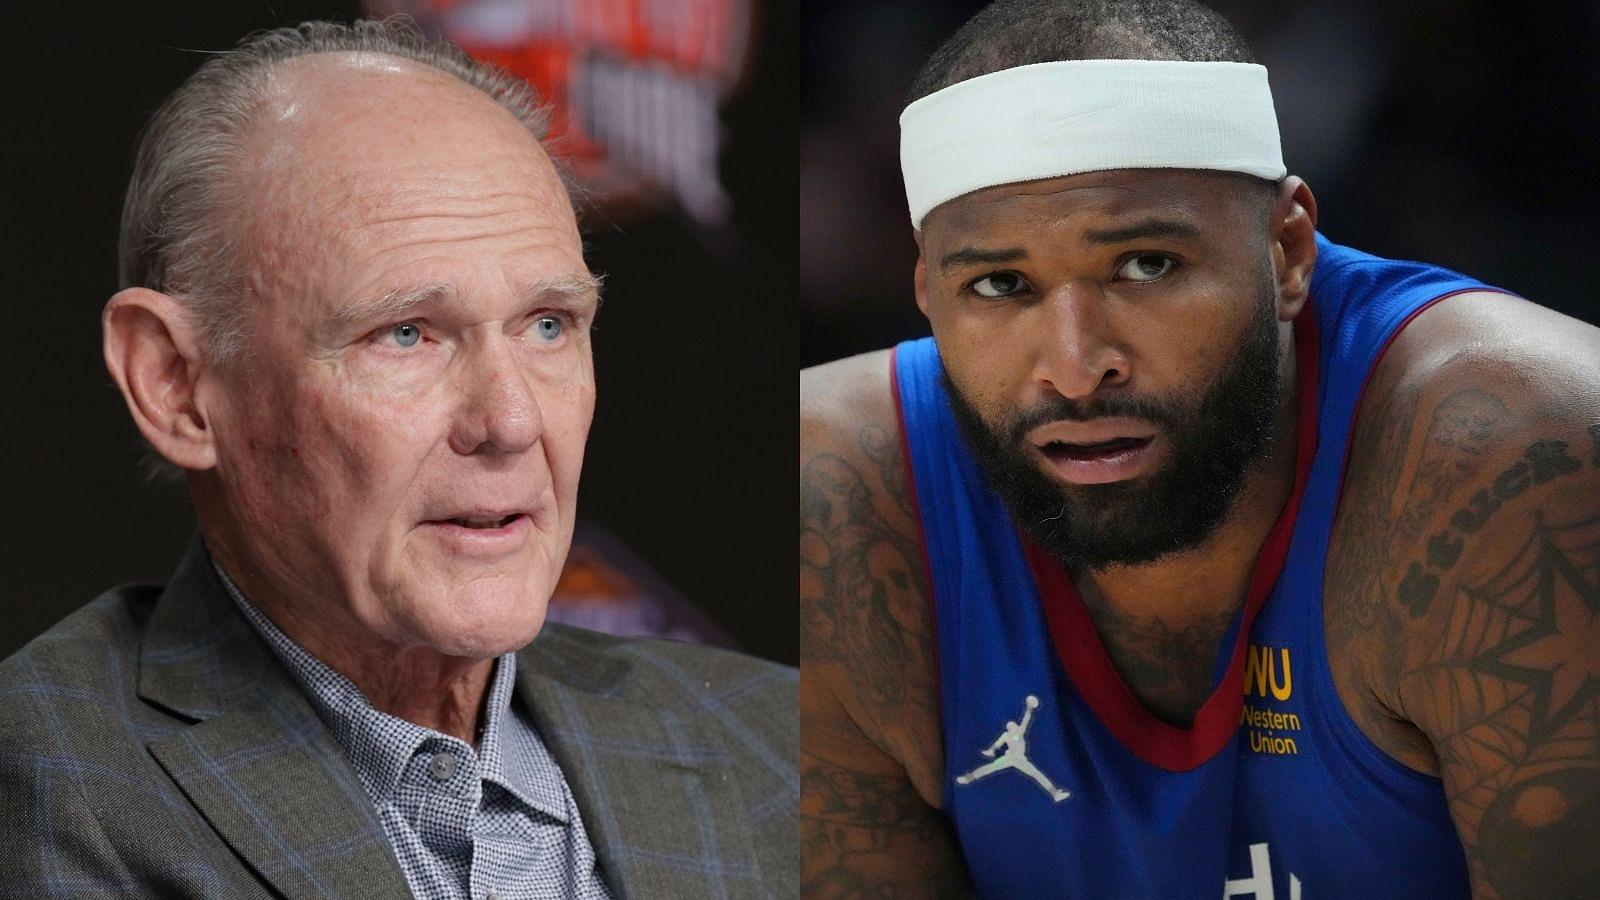 "DeMarcus Cousins they paid you $50M": George Karl tries shutting up Boogie, says Sacramento Kings gave him opportunity to play professional basketball for a living'